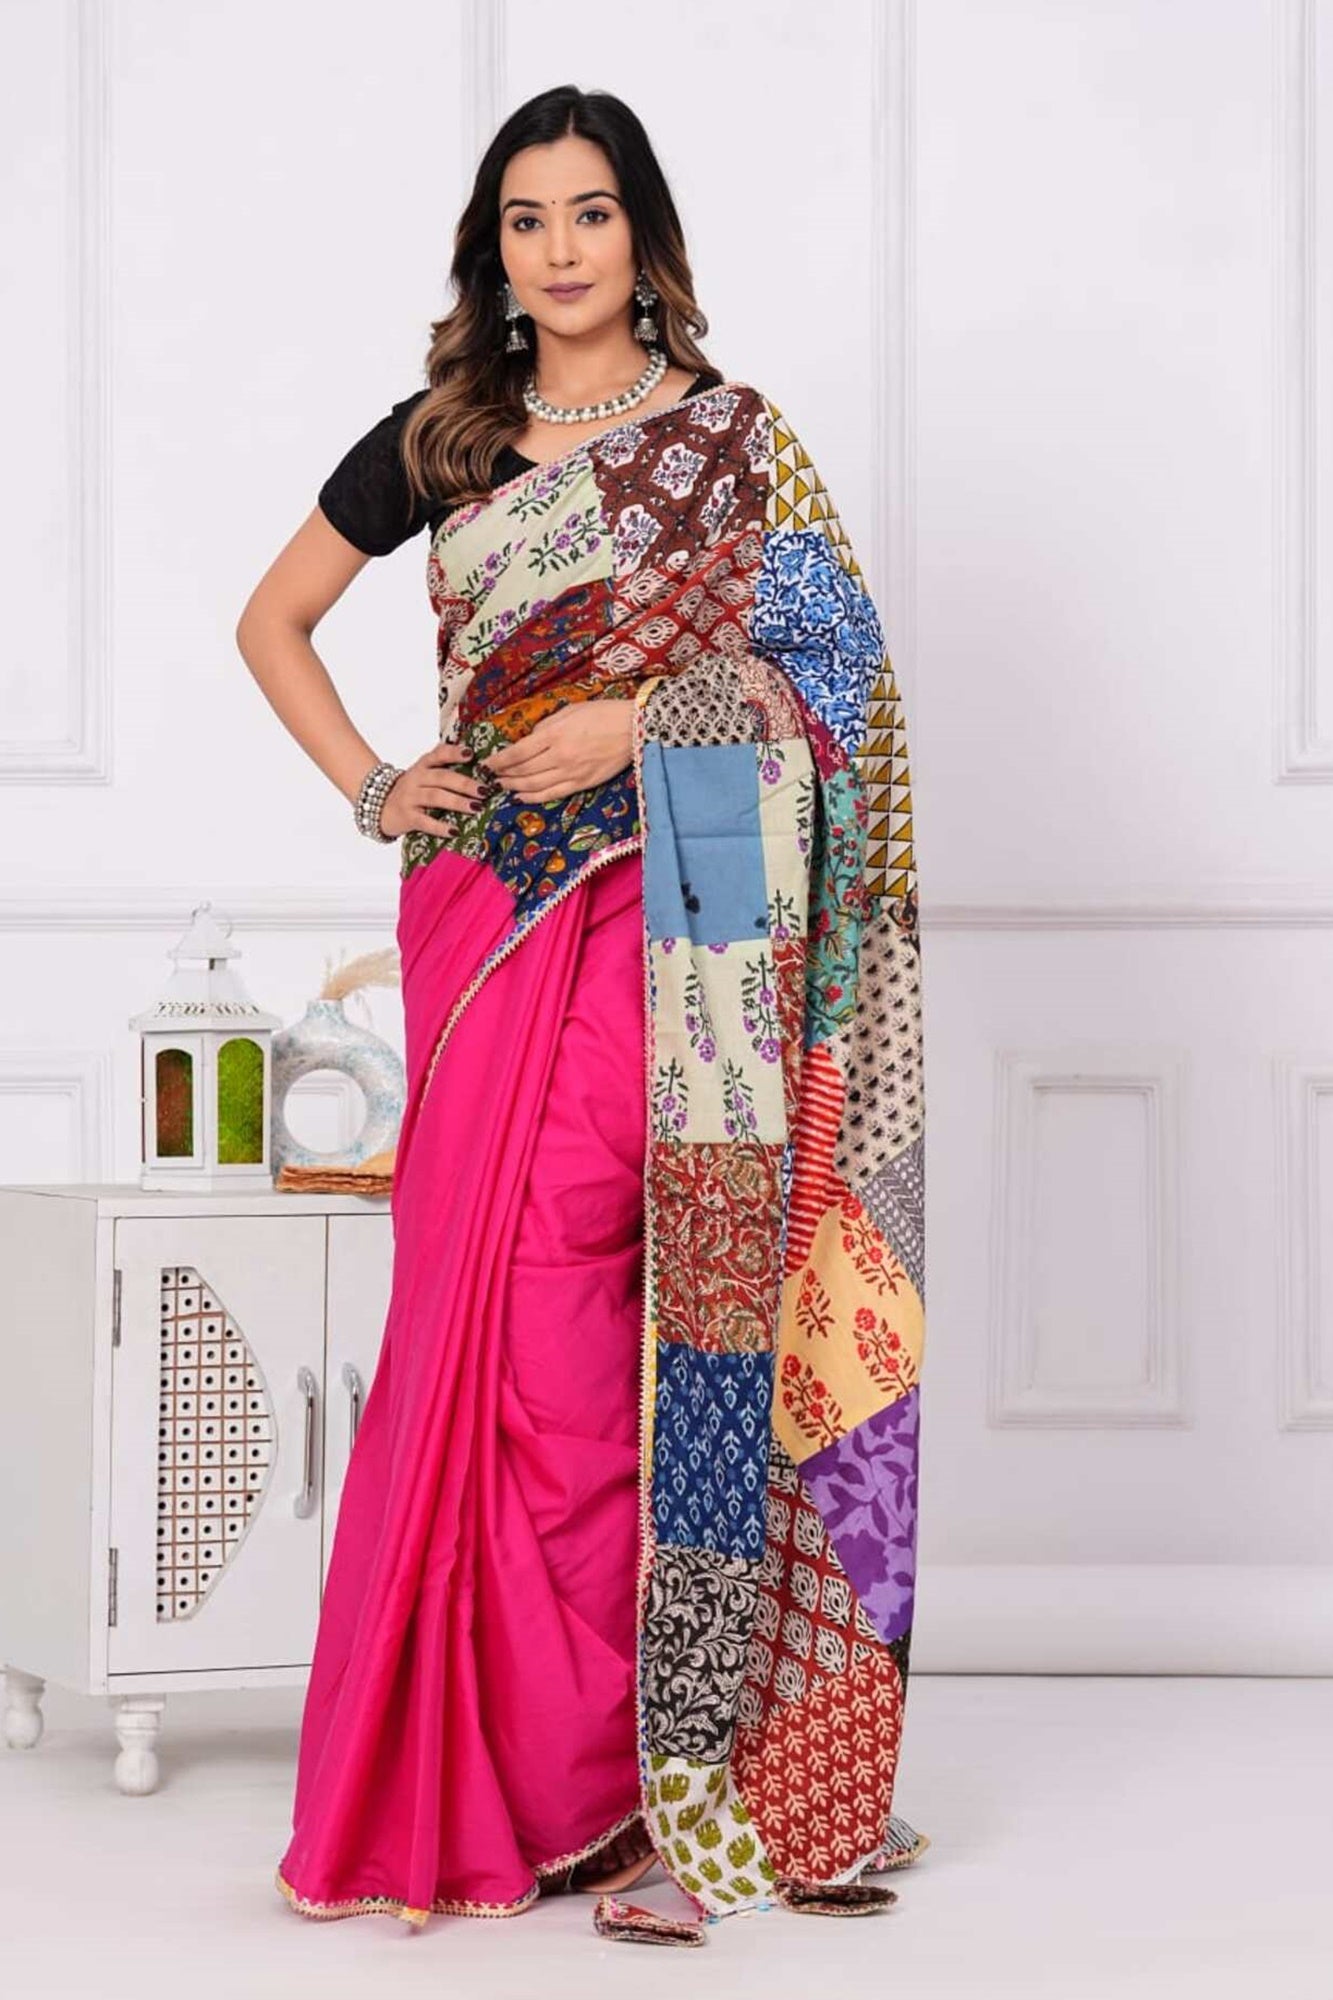 stylish Pink Vibrant Patch Work Saree With Styles Tassels on  Pallu  Pure Cotton Ready To Wear Saree